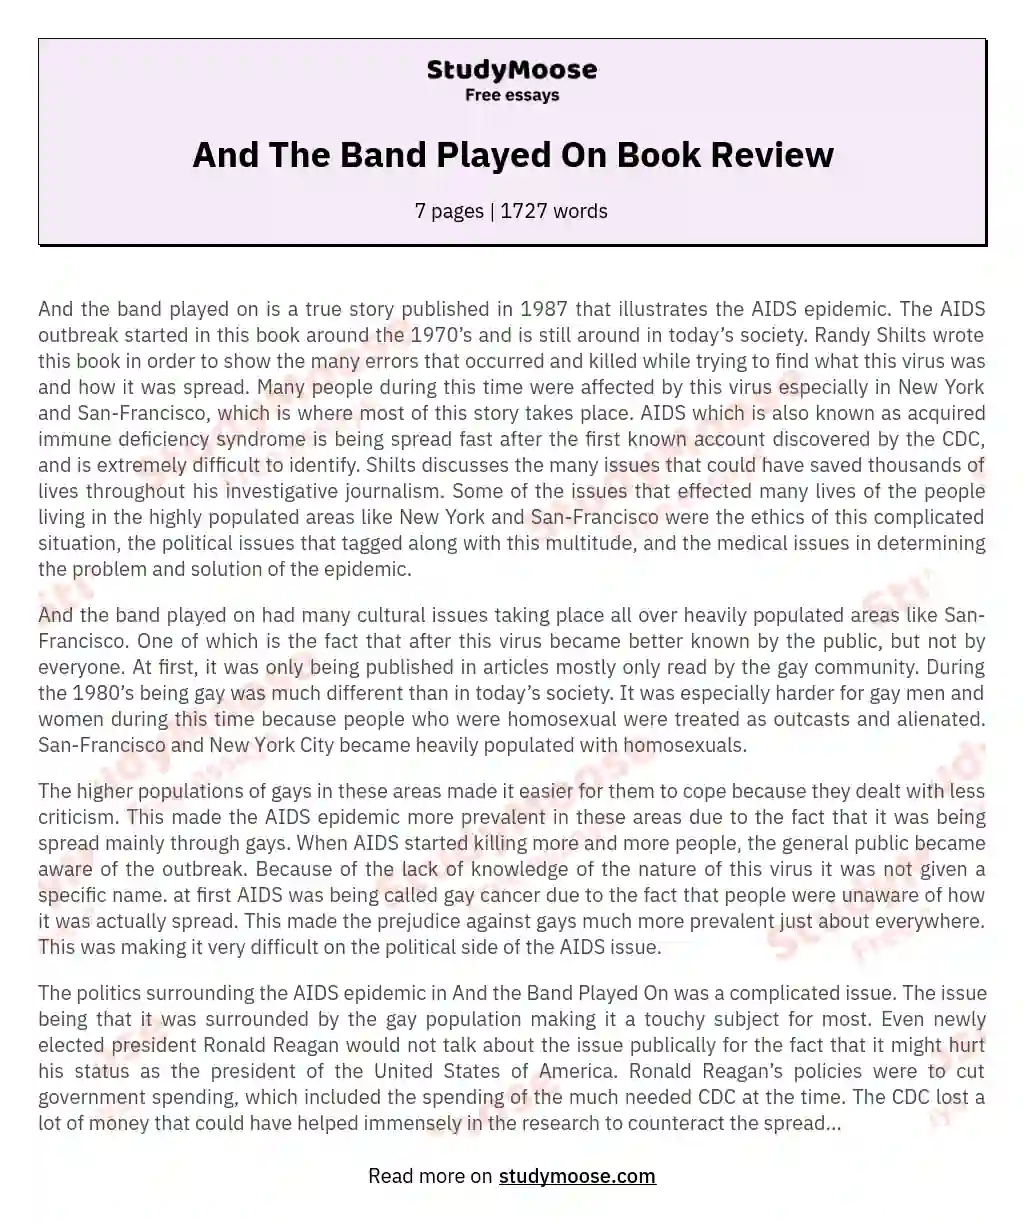 "And the Band Played On": A Critical Analysis of the AIDS Epidemic essay